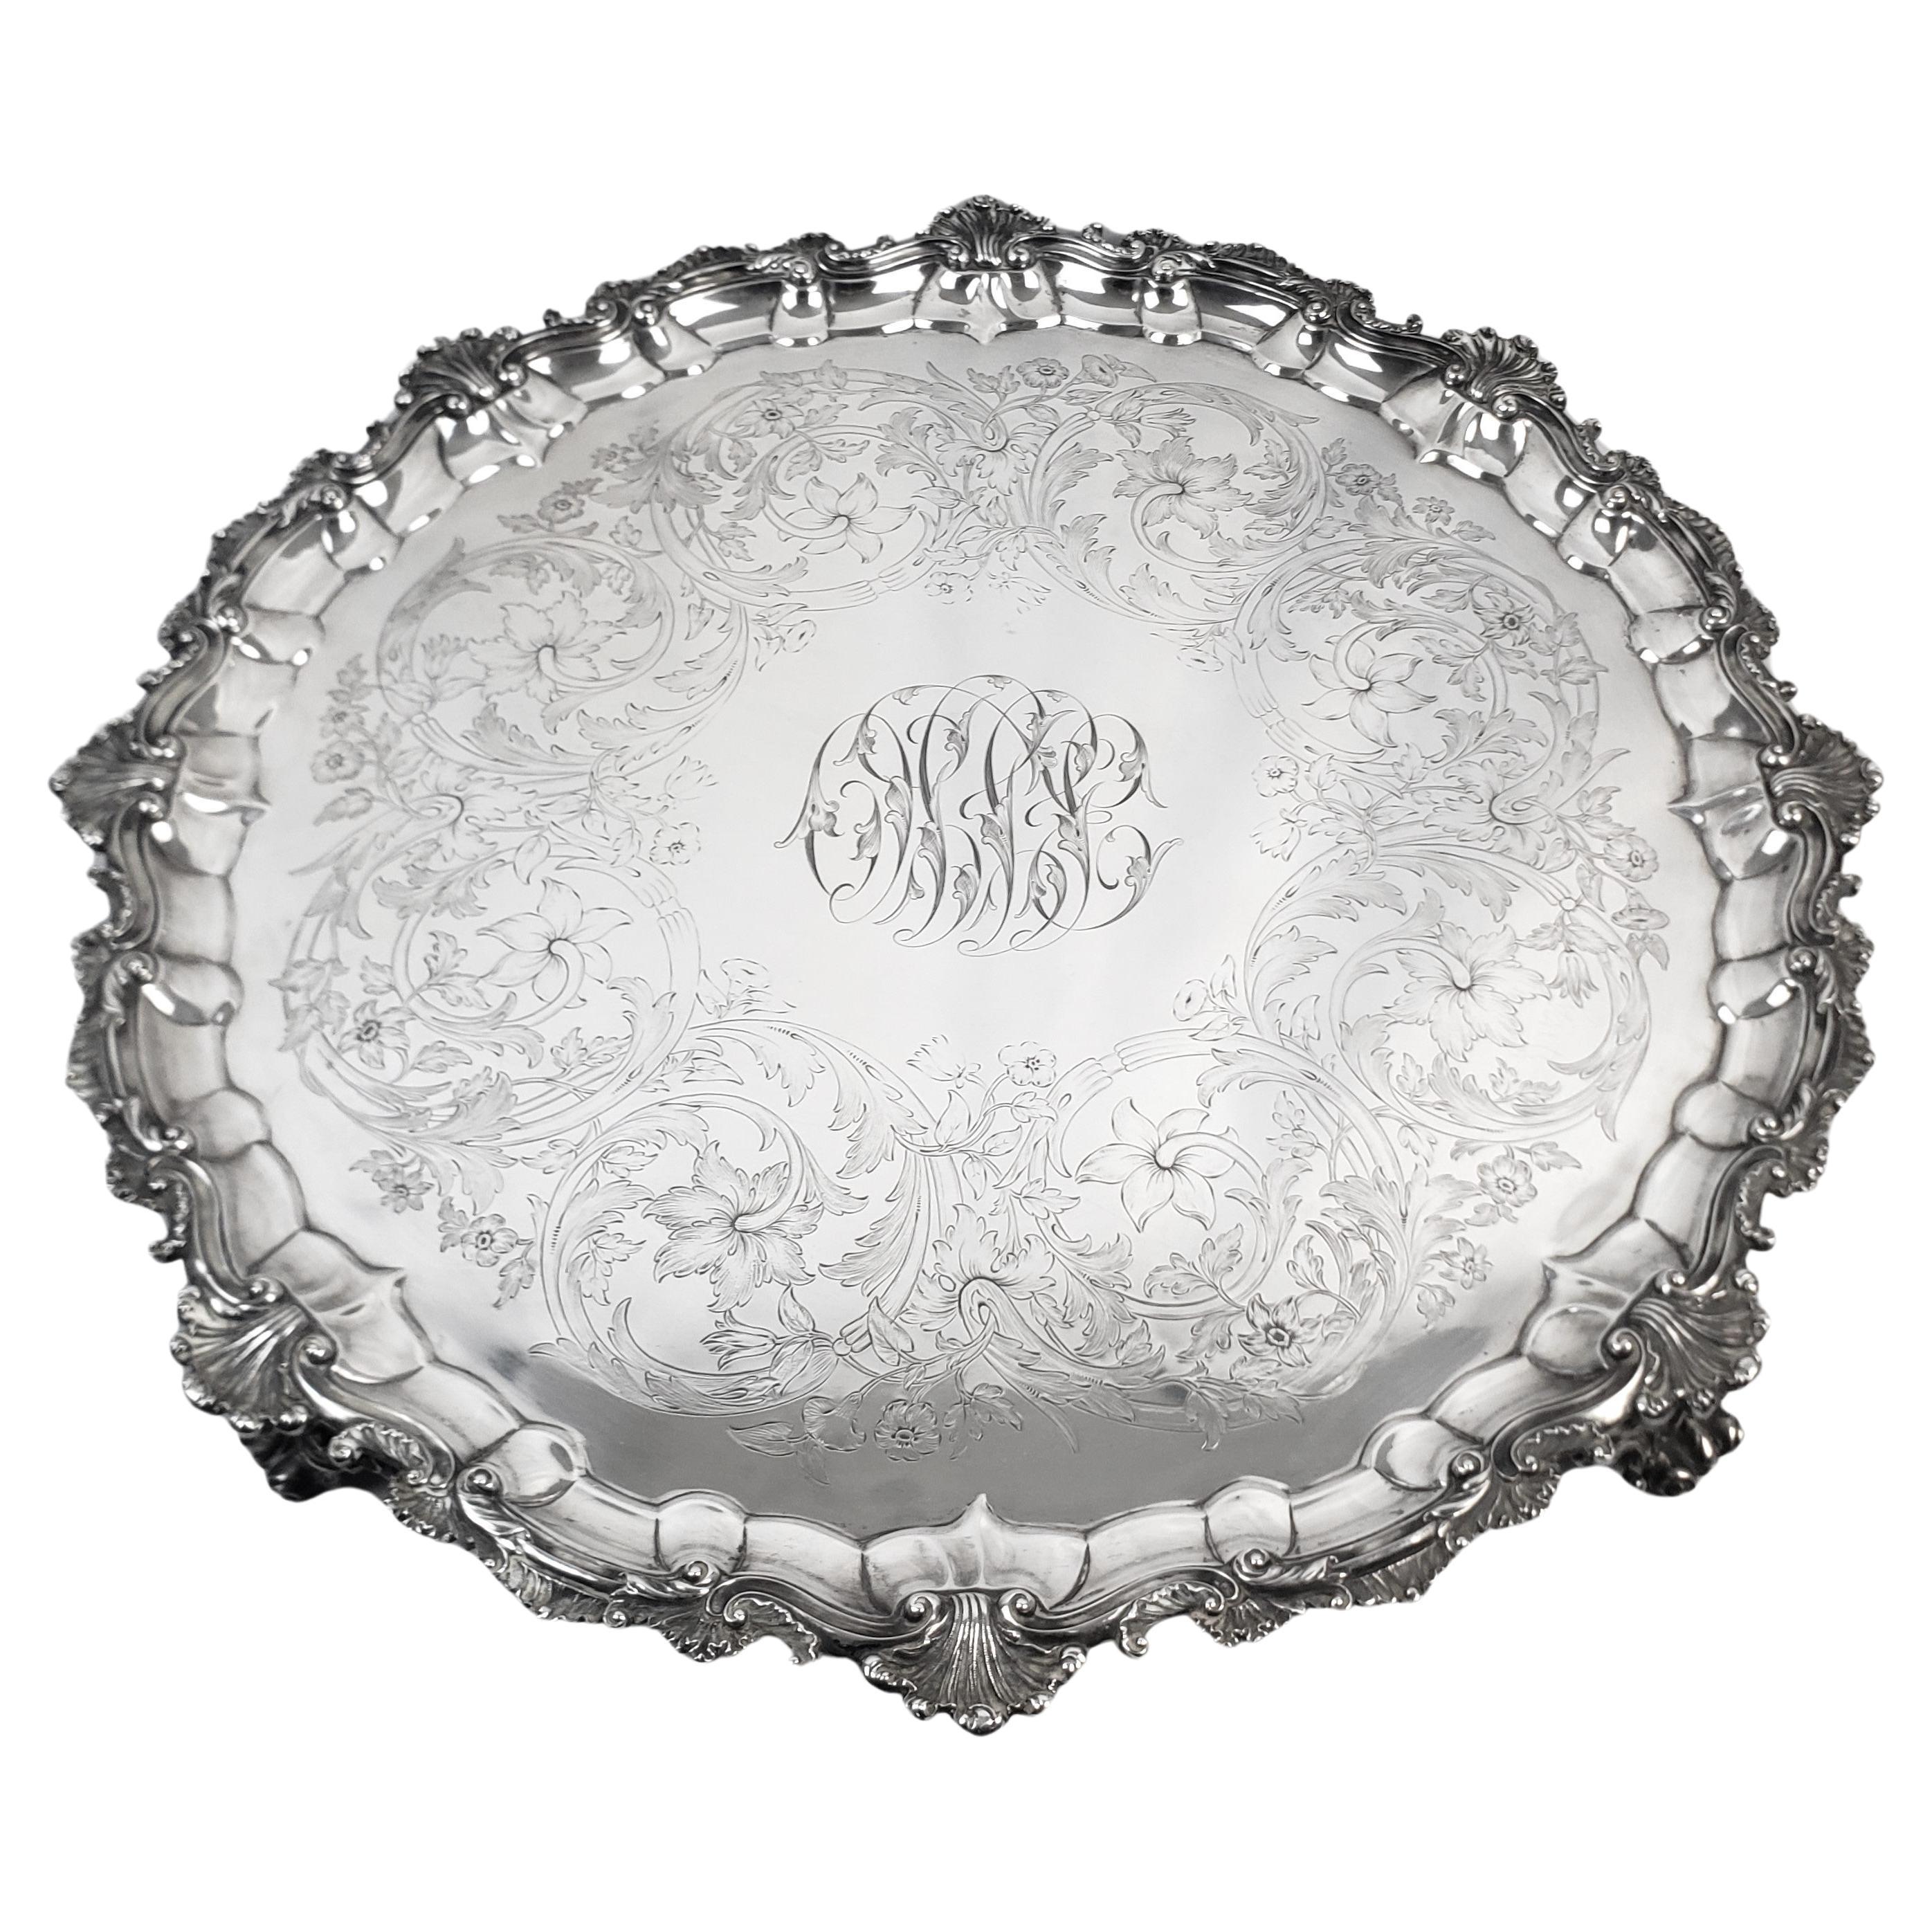 Huge Antique Sterling Silver Salver or Footed Tray with Ornate Floral Engraving